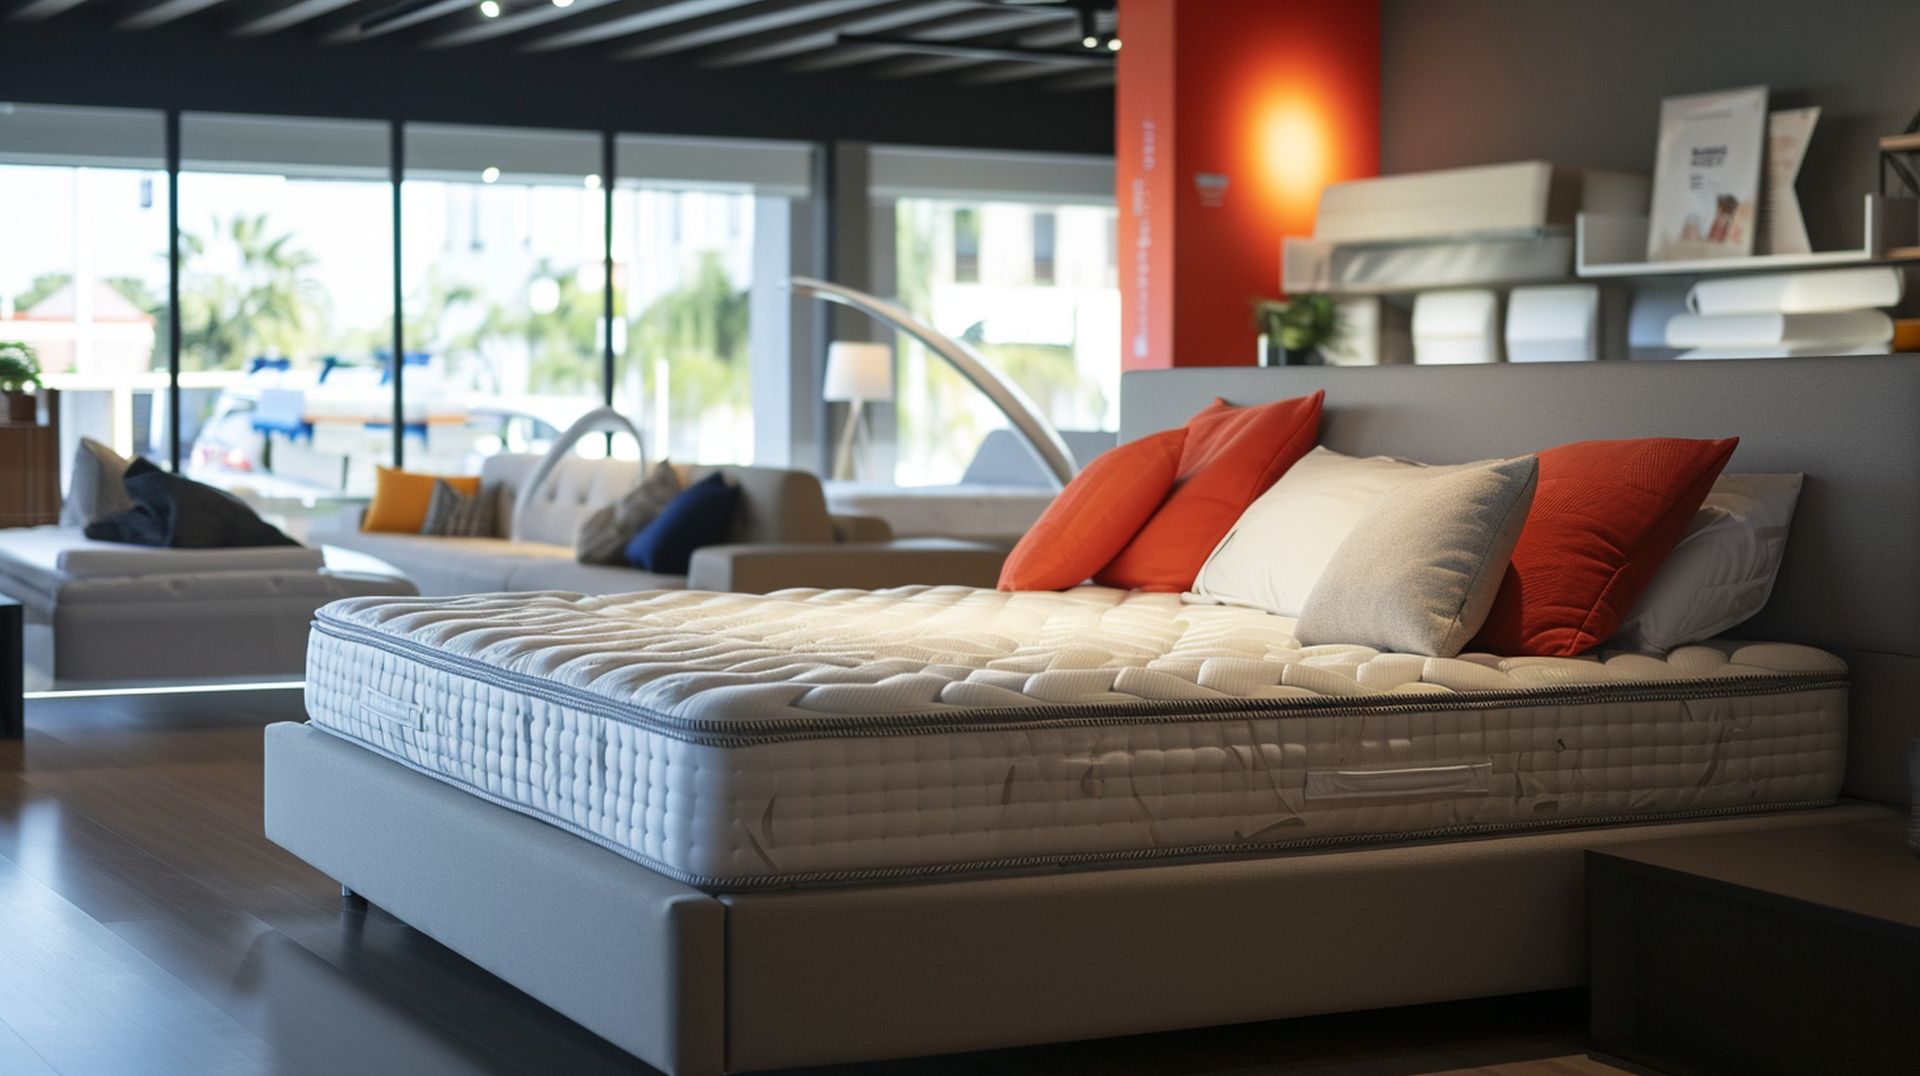 If you're looking for a new bed, mattress stores in Citrus Heights offer the best customer and delivery service, financing, and warranties in California